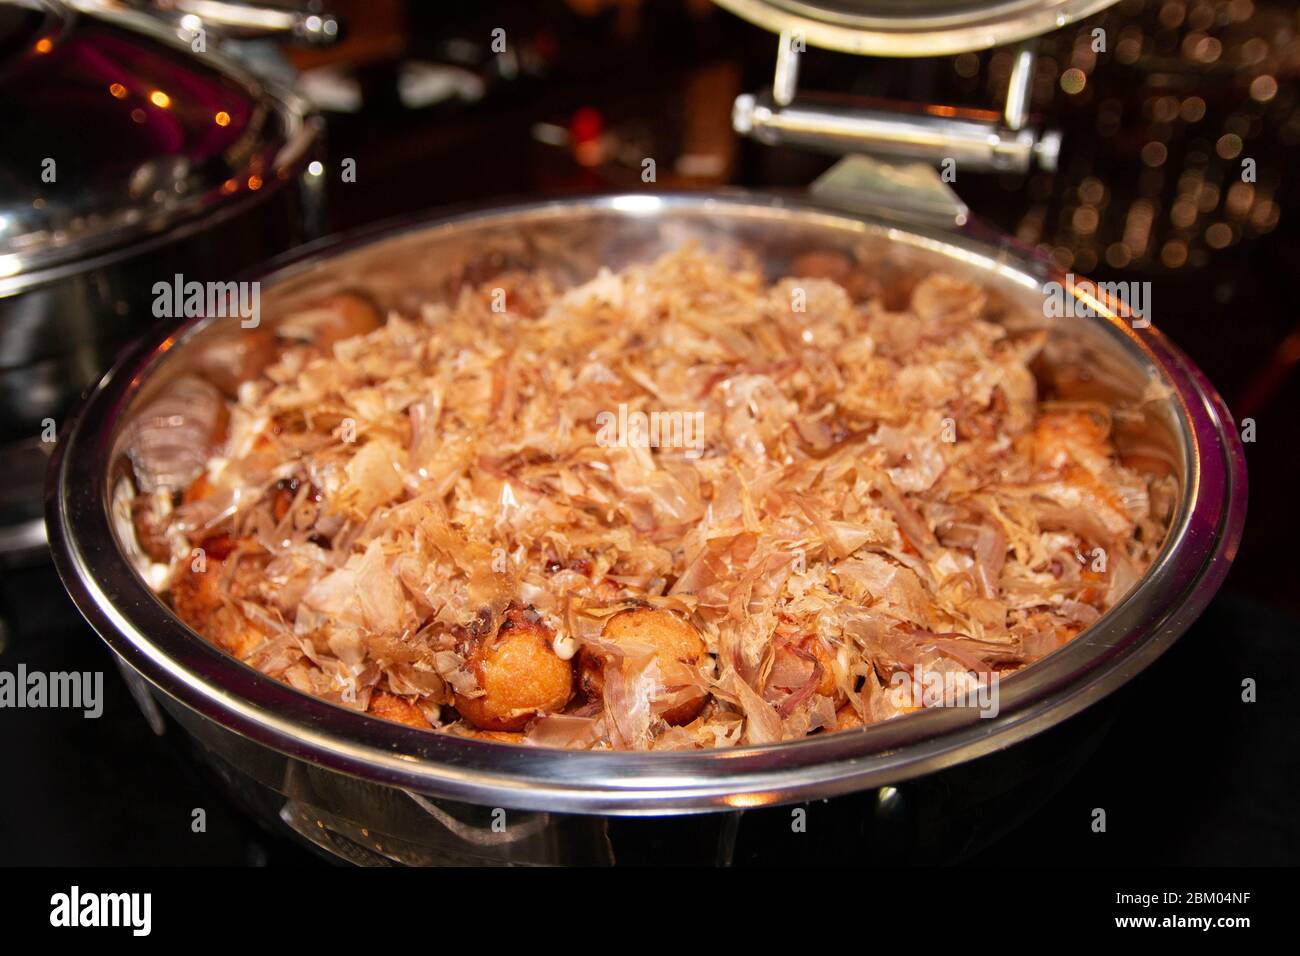 Large portion of Japanese style Takoyaki with dried bonito flakes on top in a buffet tray. Stock Photo